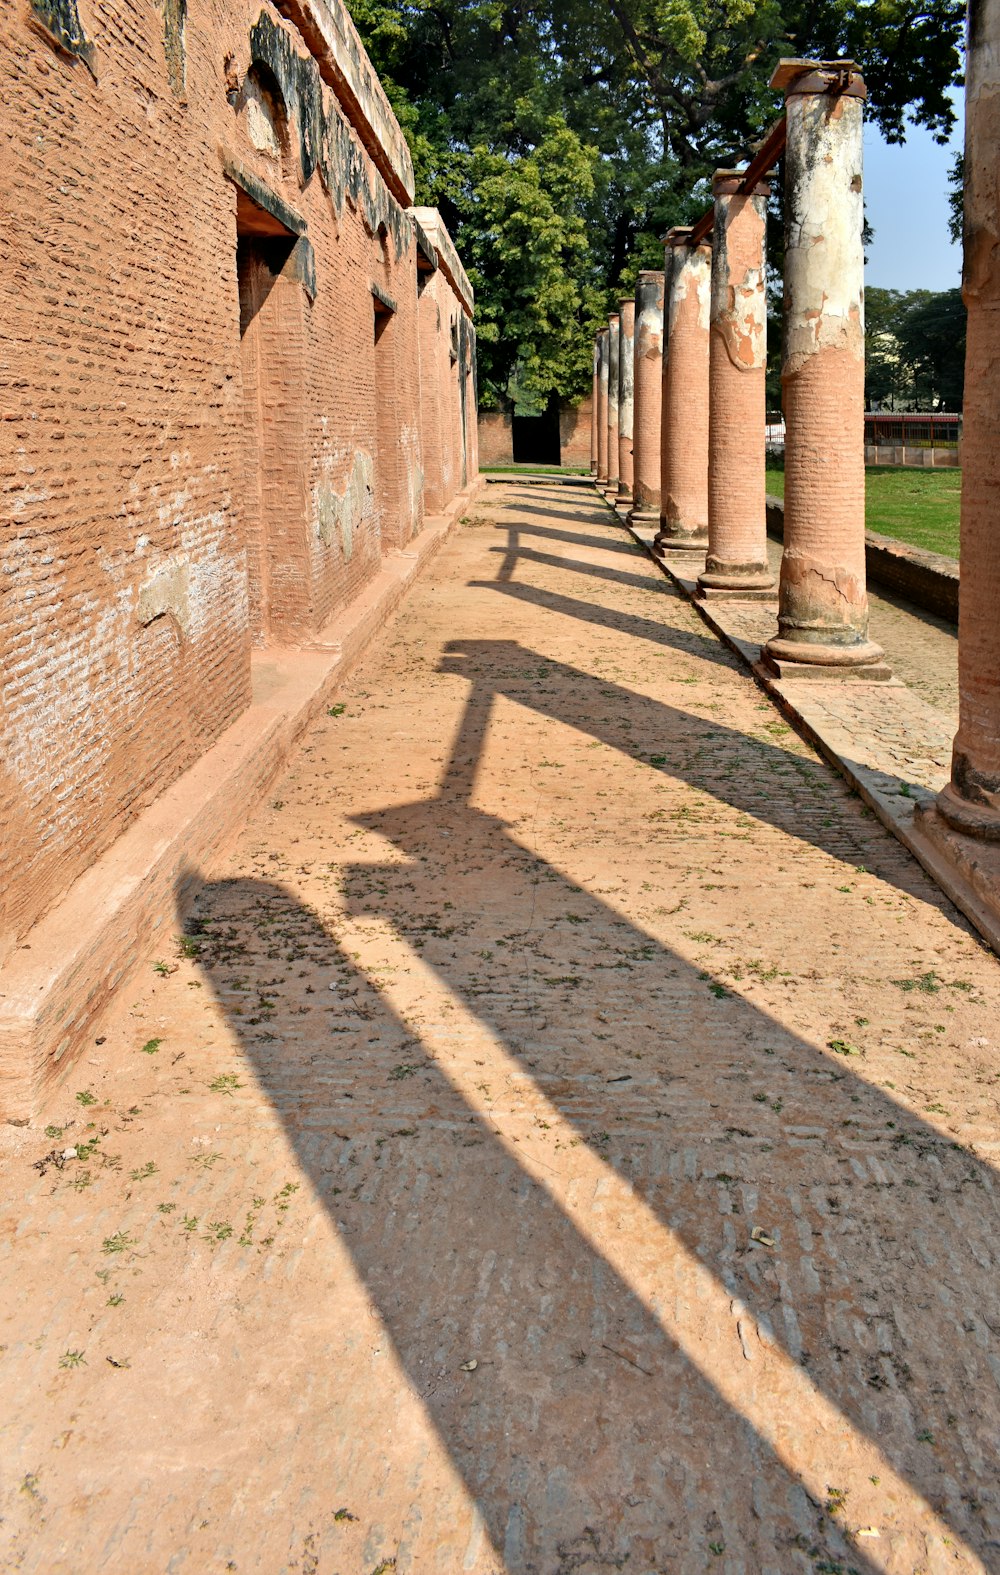 a long line of stone pillars in a park